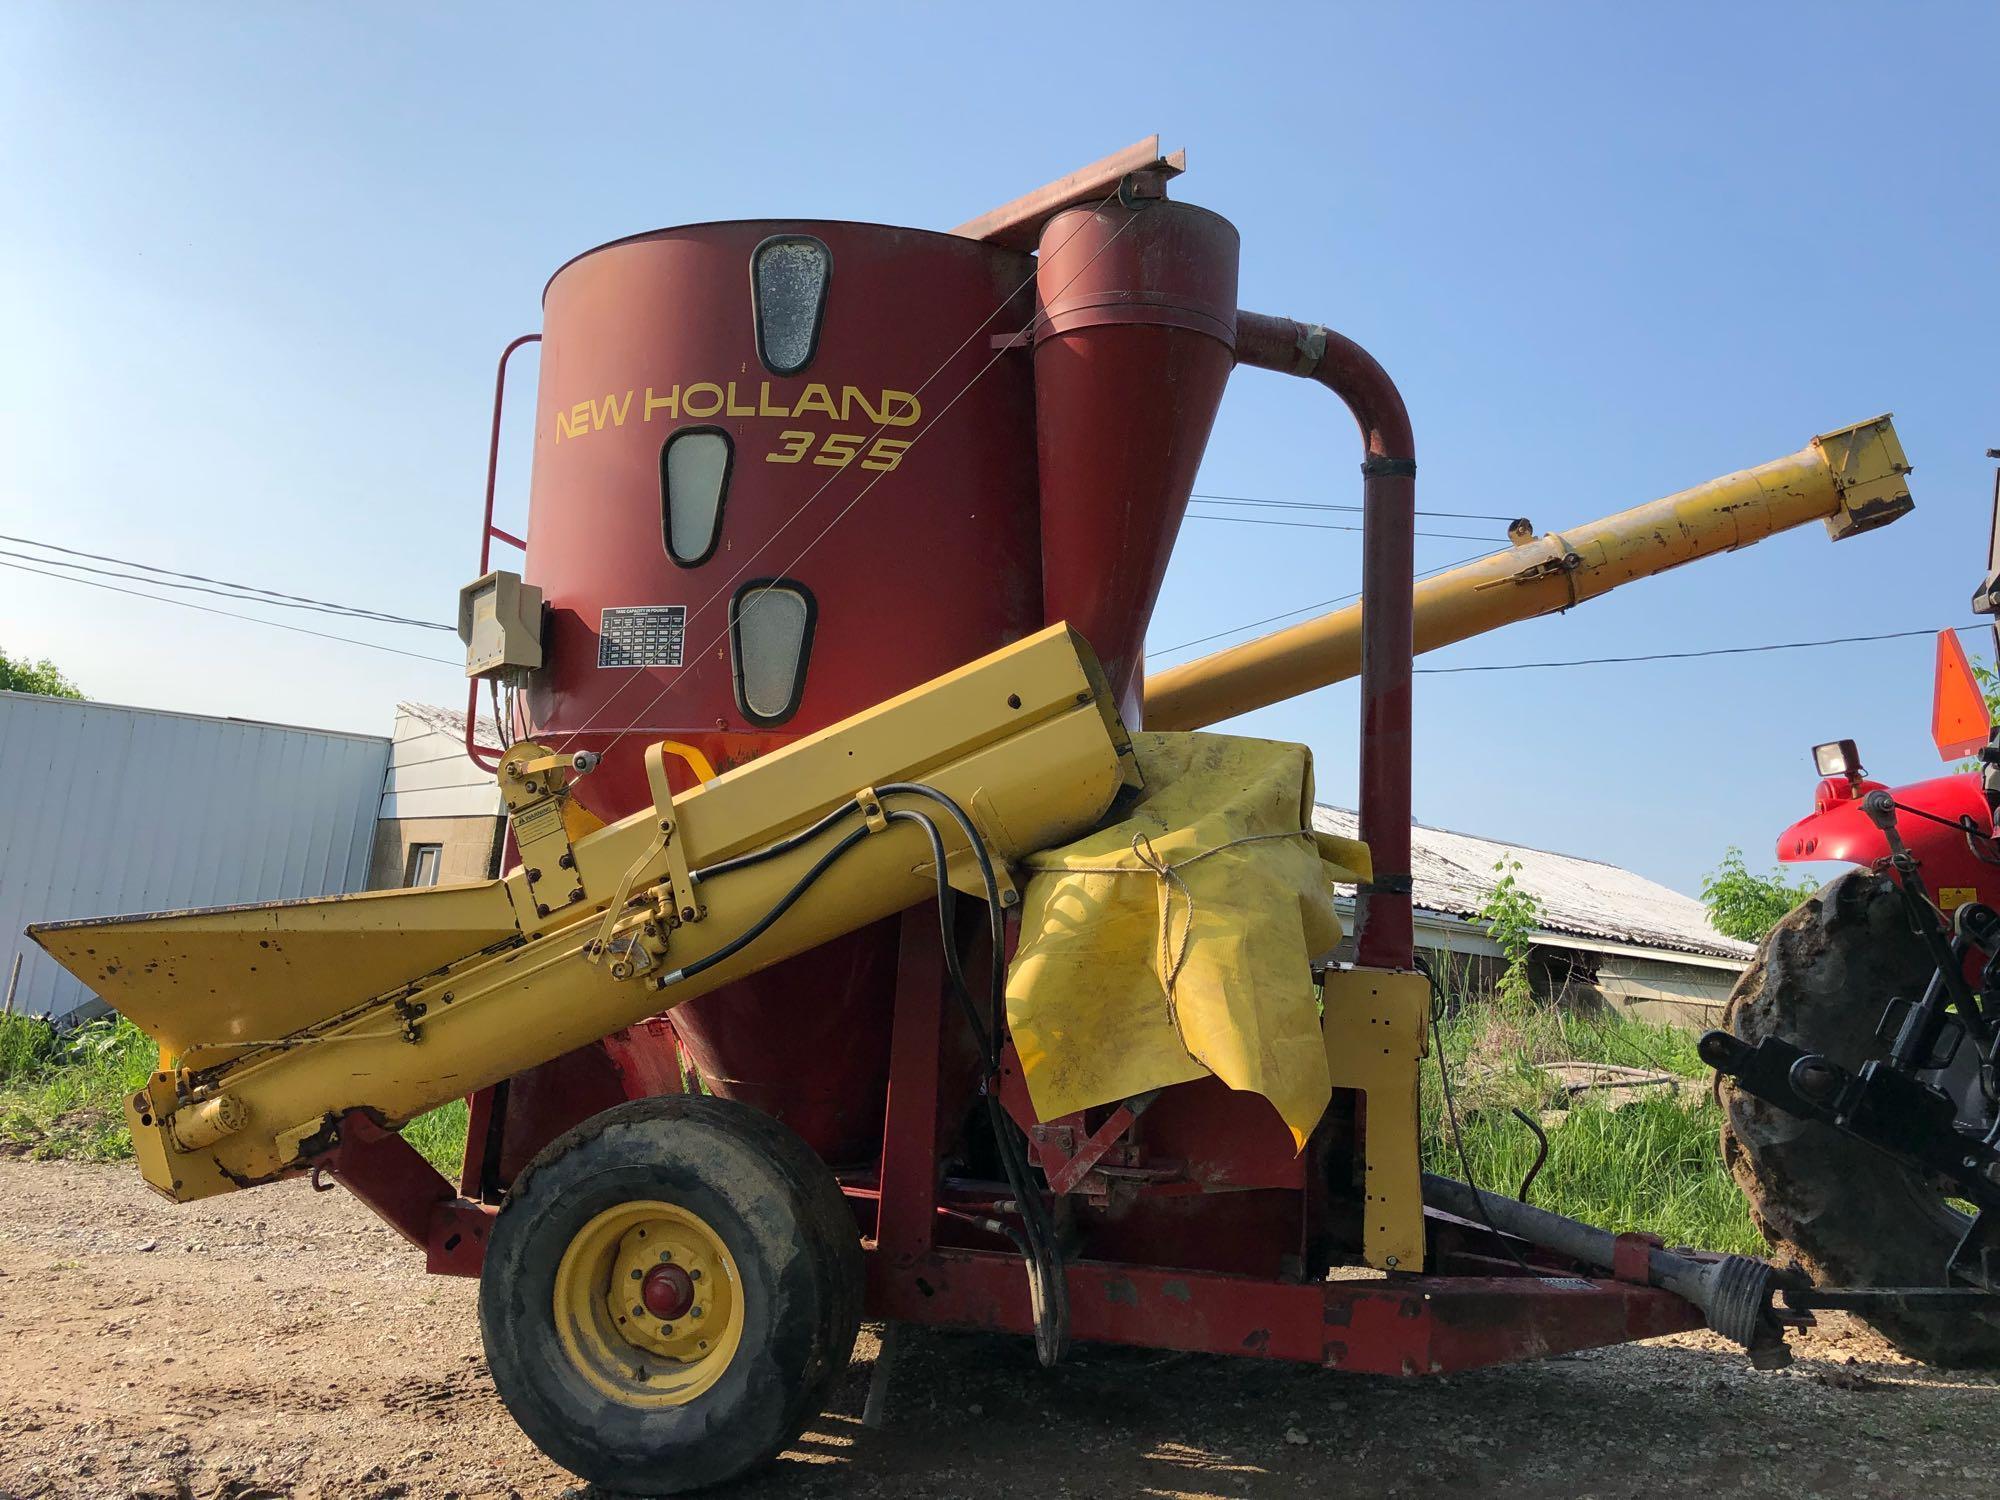 355 New Holland Grinder mixer w/scales